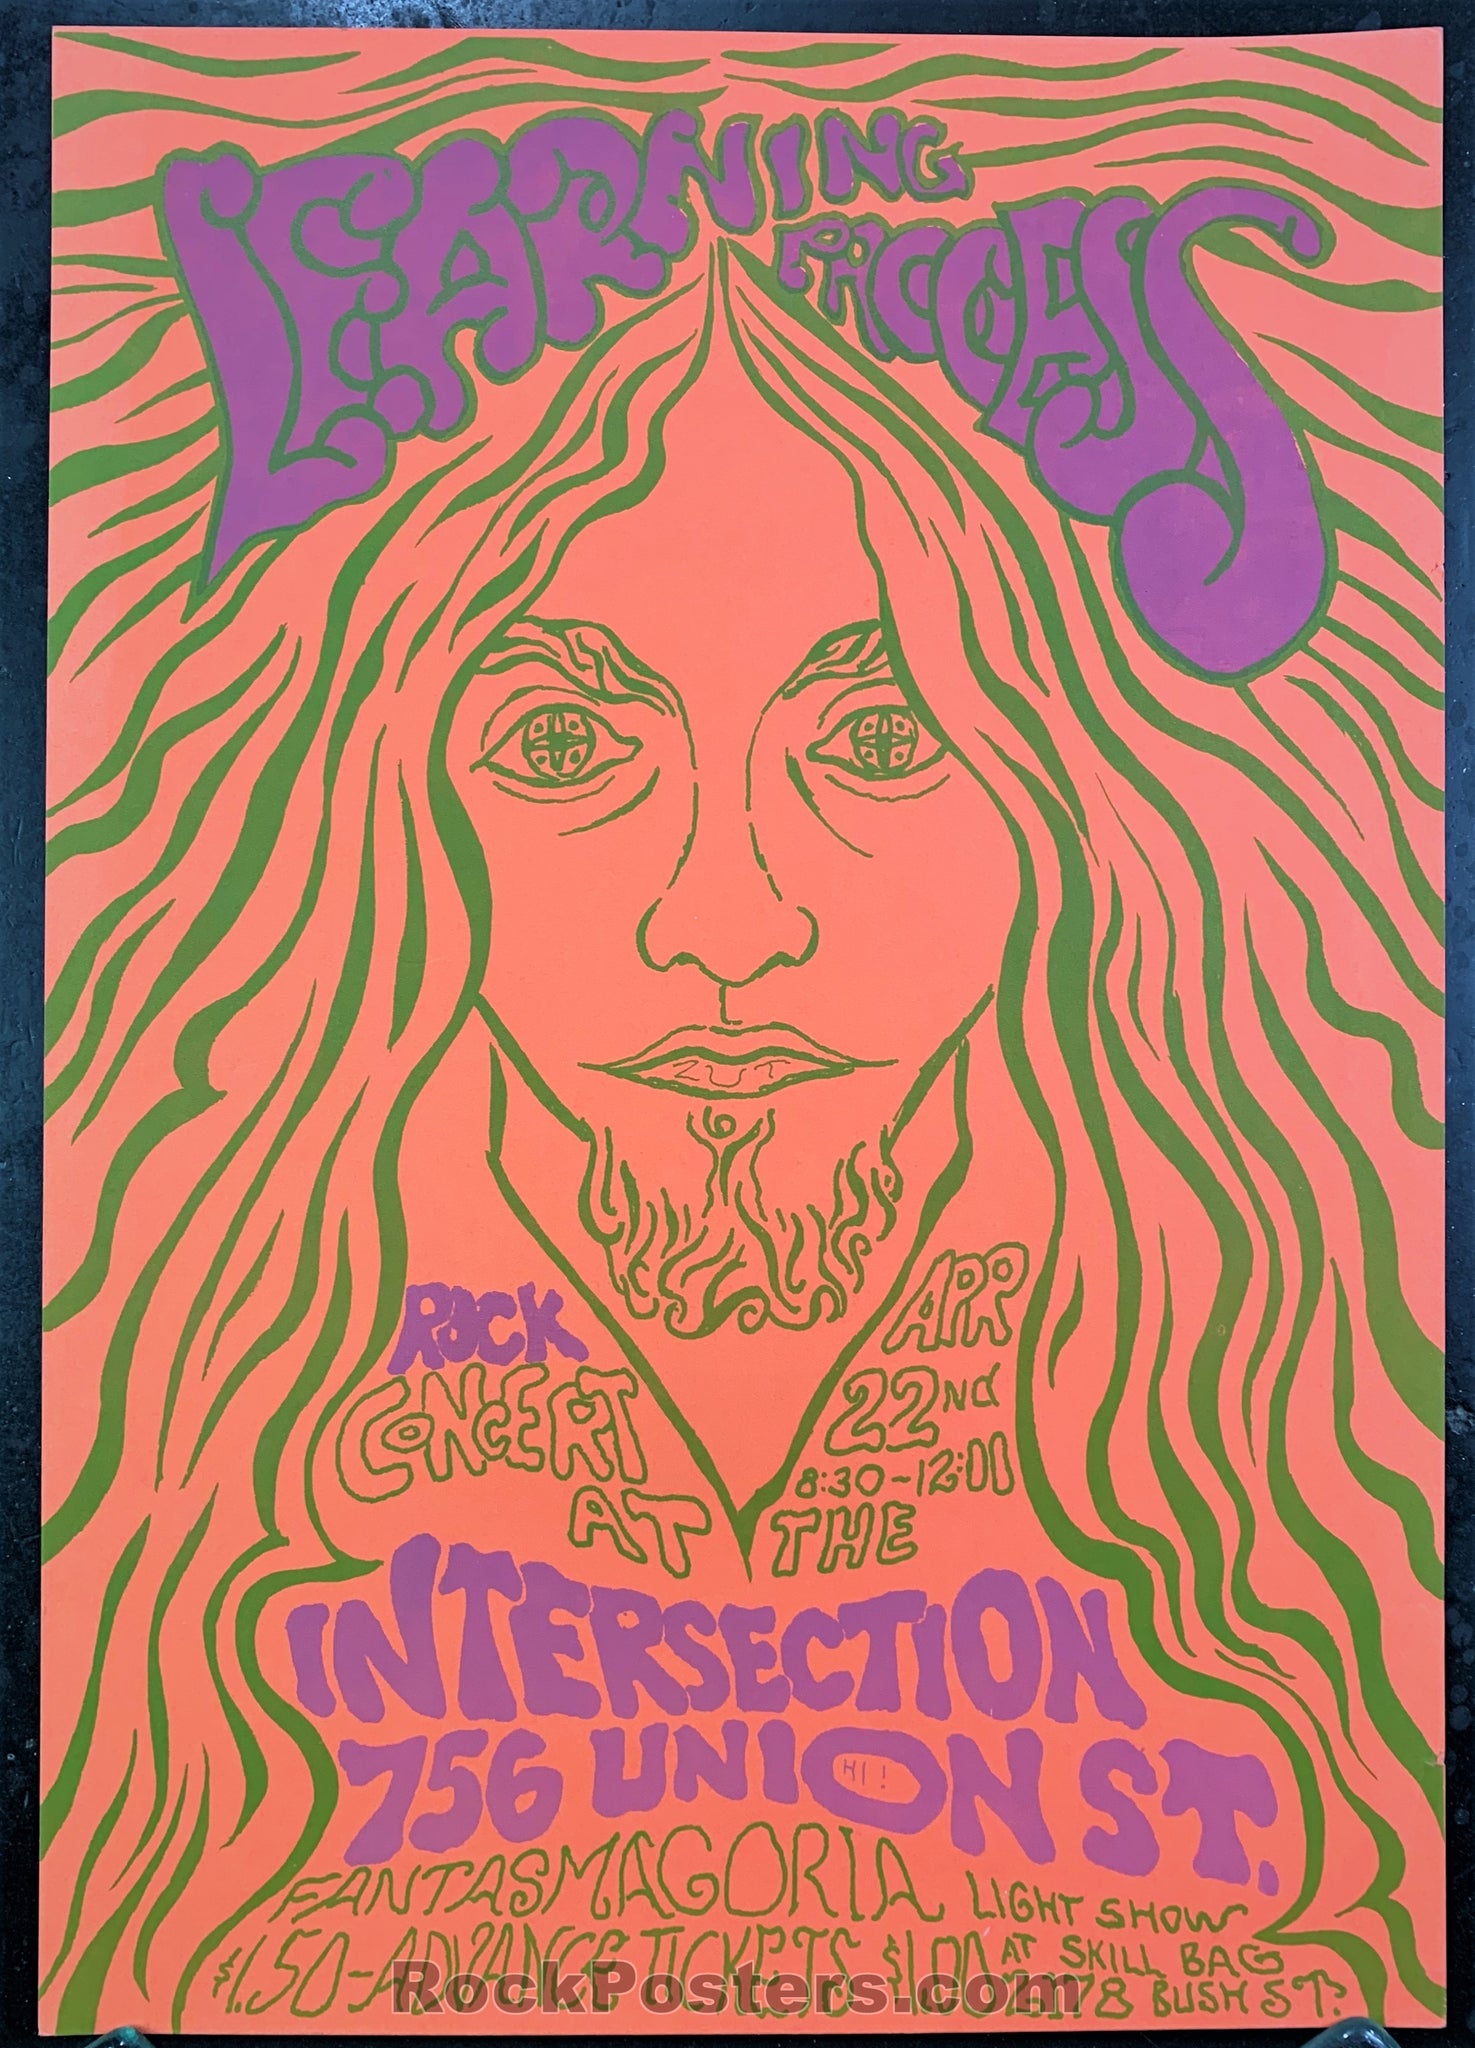 AUCTION - Psychedelic - San Francisco 60's Poster - The Intersection - Condition - Excellent